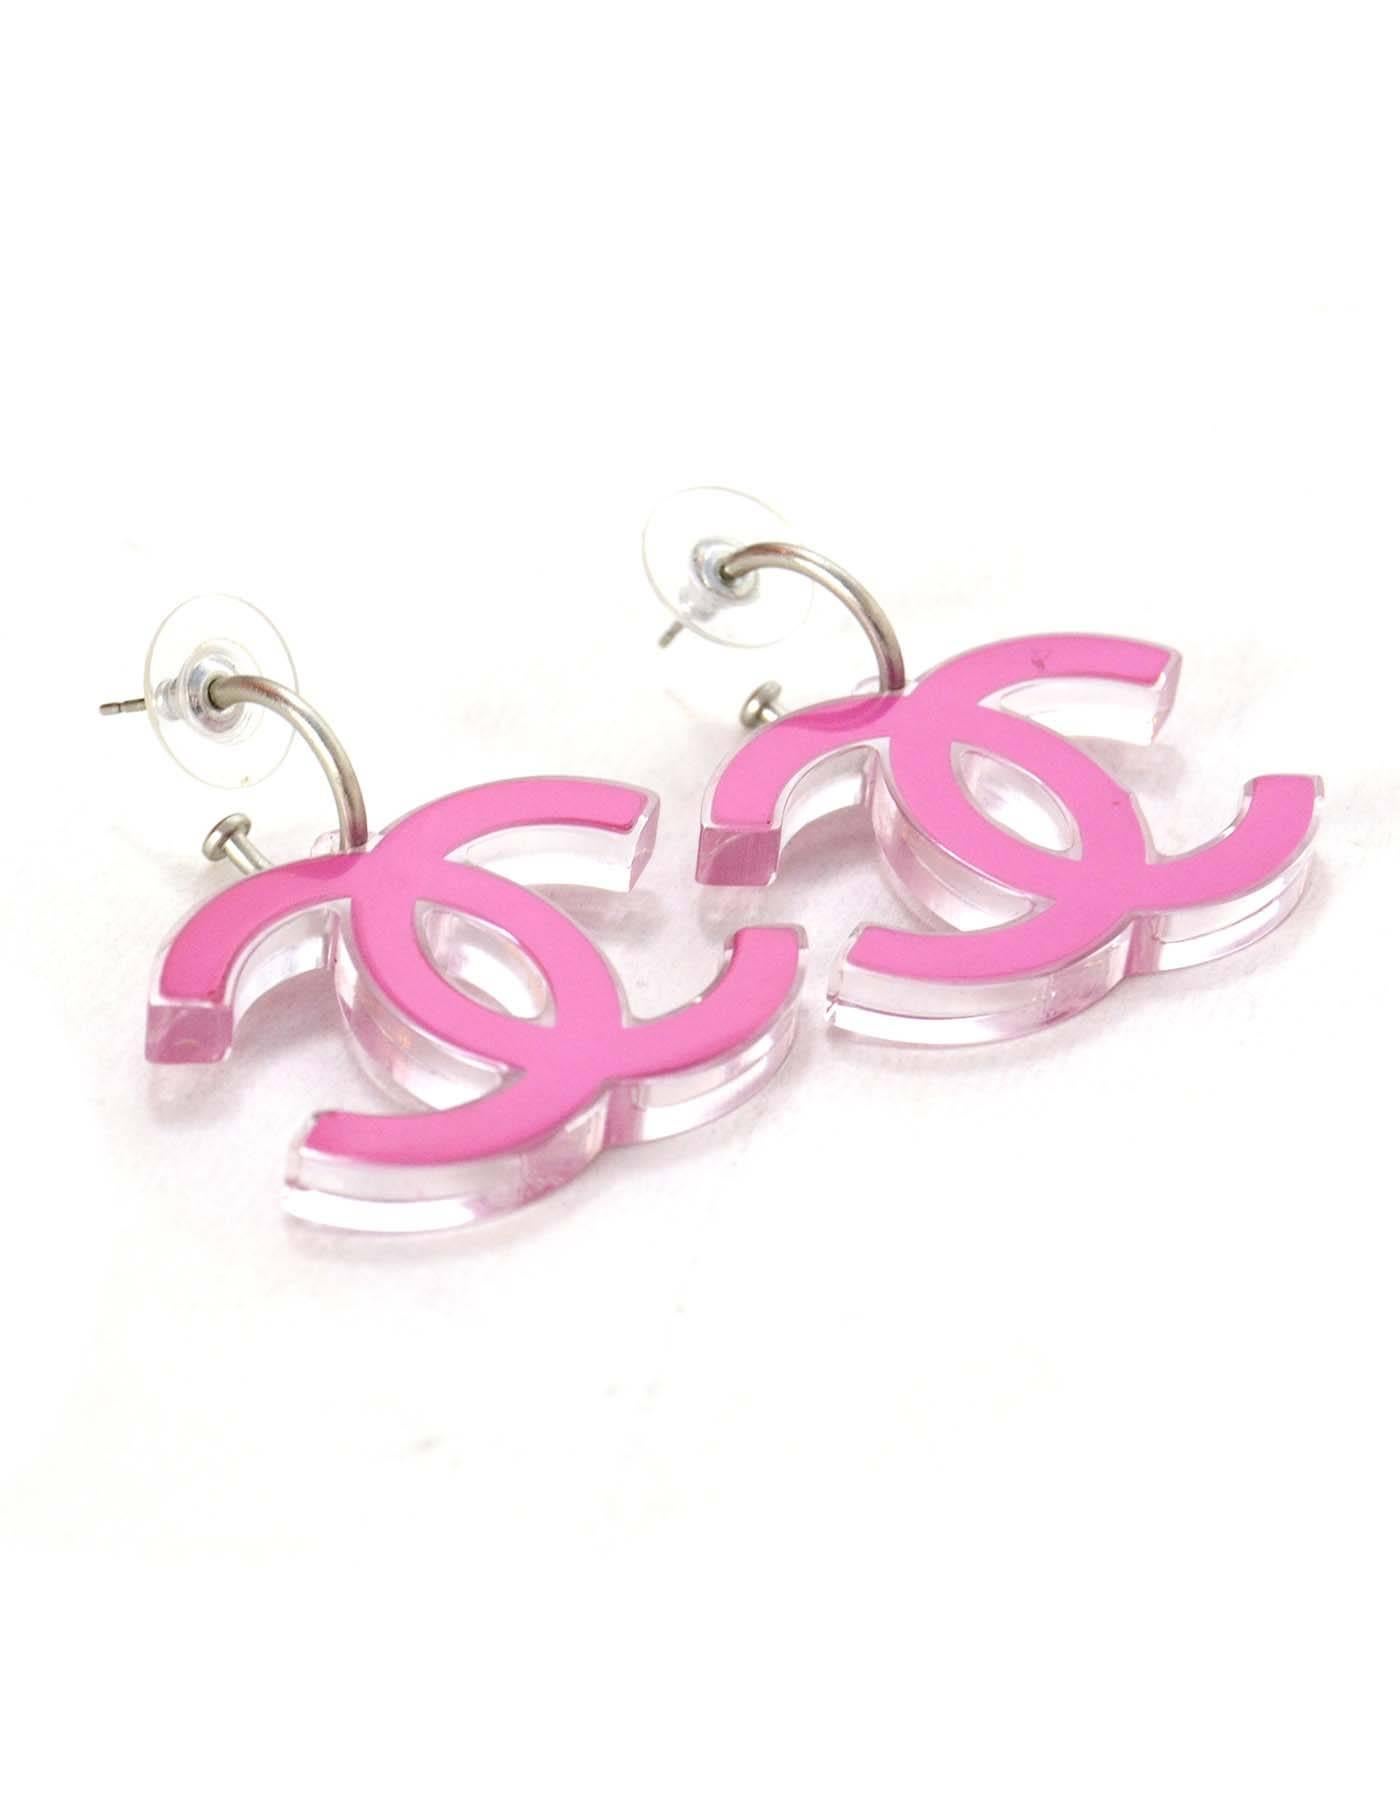 Chanel Pink Resin CC Earrings 
Made In: Italy
Year of Production: 2007
Color: Pink and silvertone
Materials: Metal and resin
Closure: Pierced back closure
Stamp: 07 CC P
Overall Condition: Excellent pre-owned condition
Measurements: